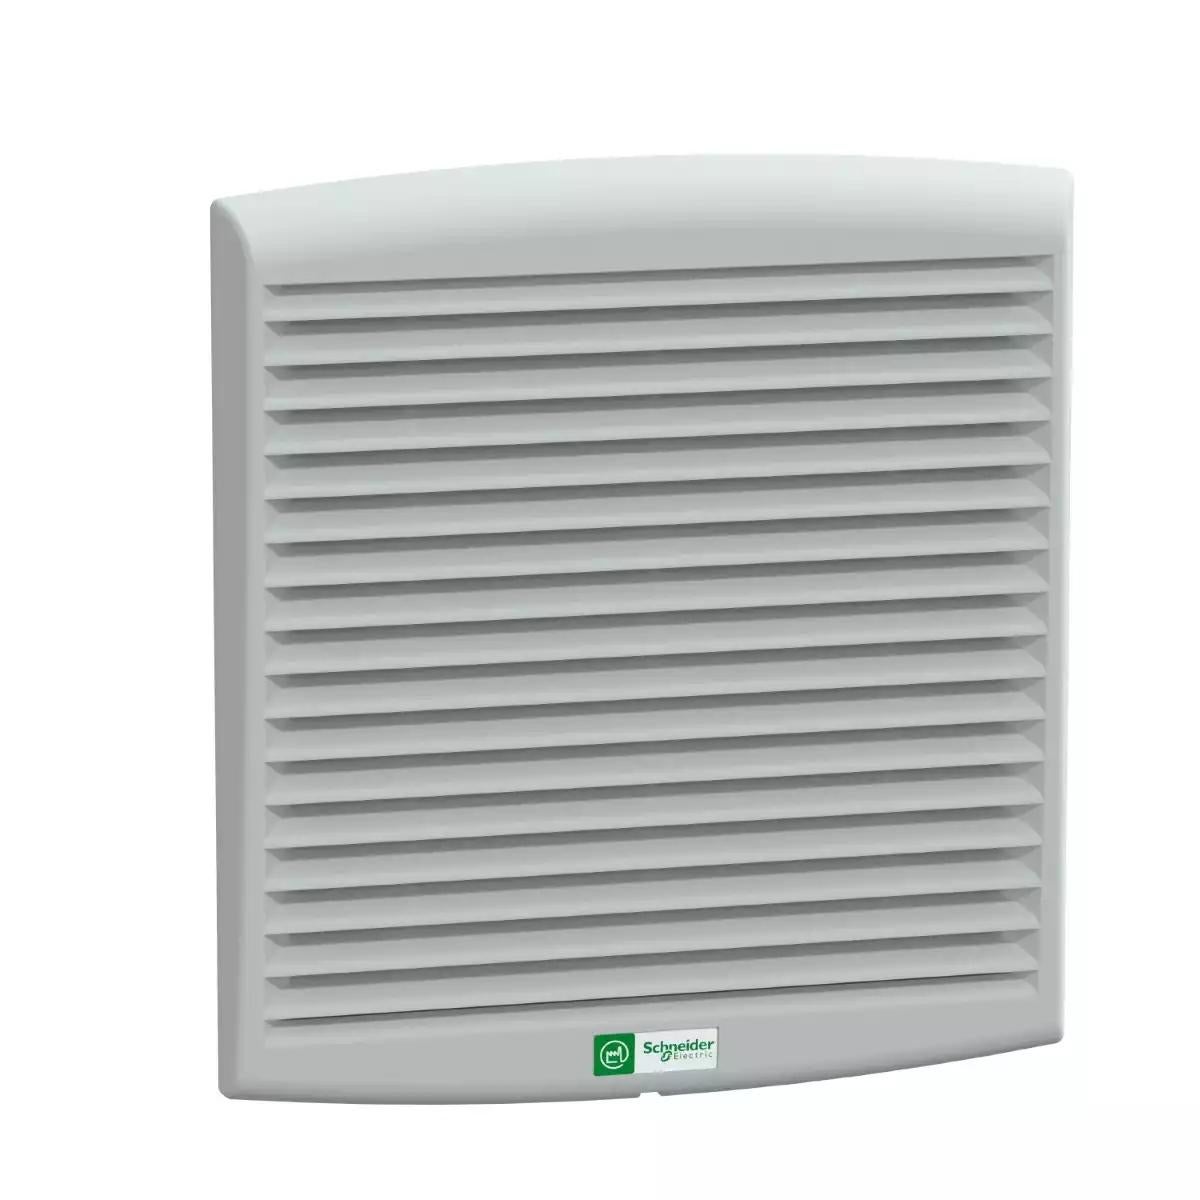 Schneider Electric ClimaSys CV forced vent. IP54, 300m3/h, 230V, with outlet grille and filter G2